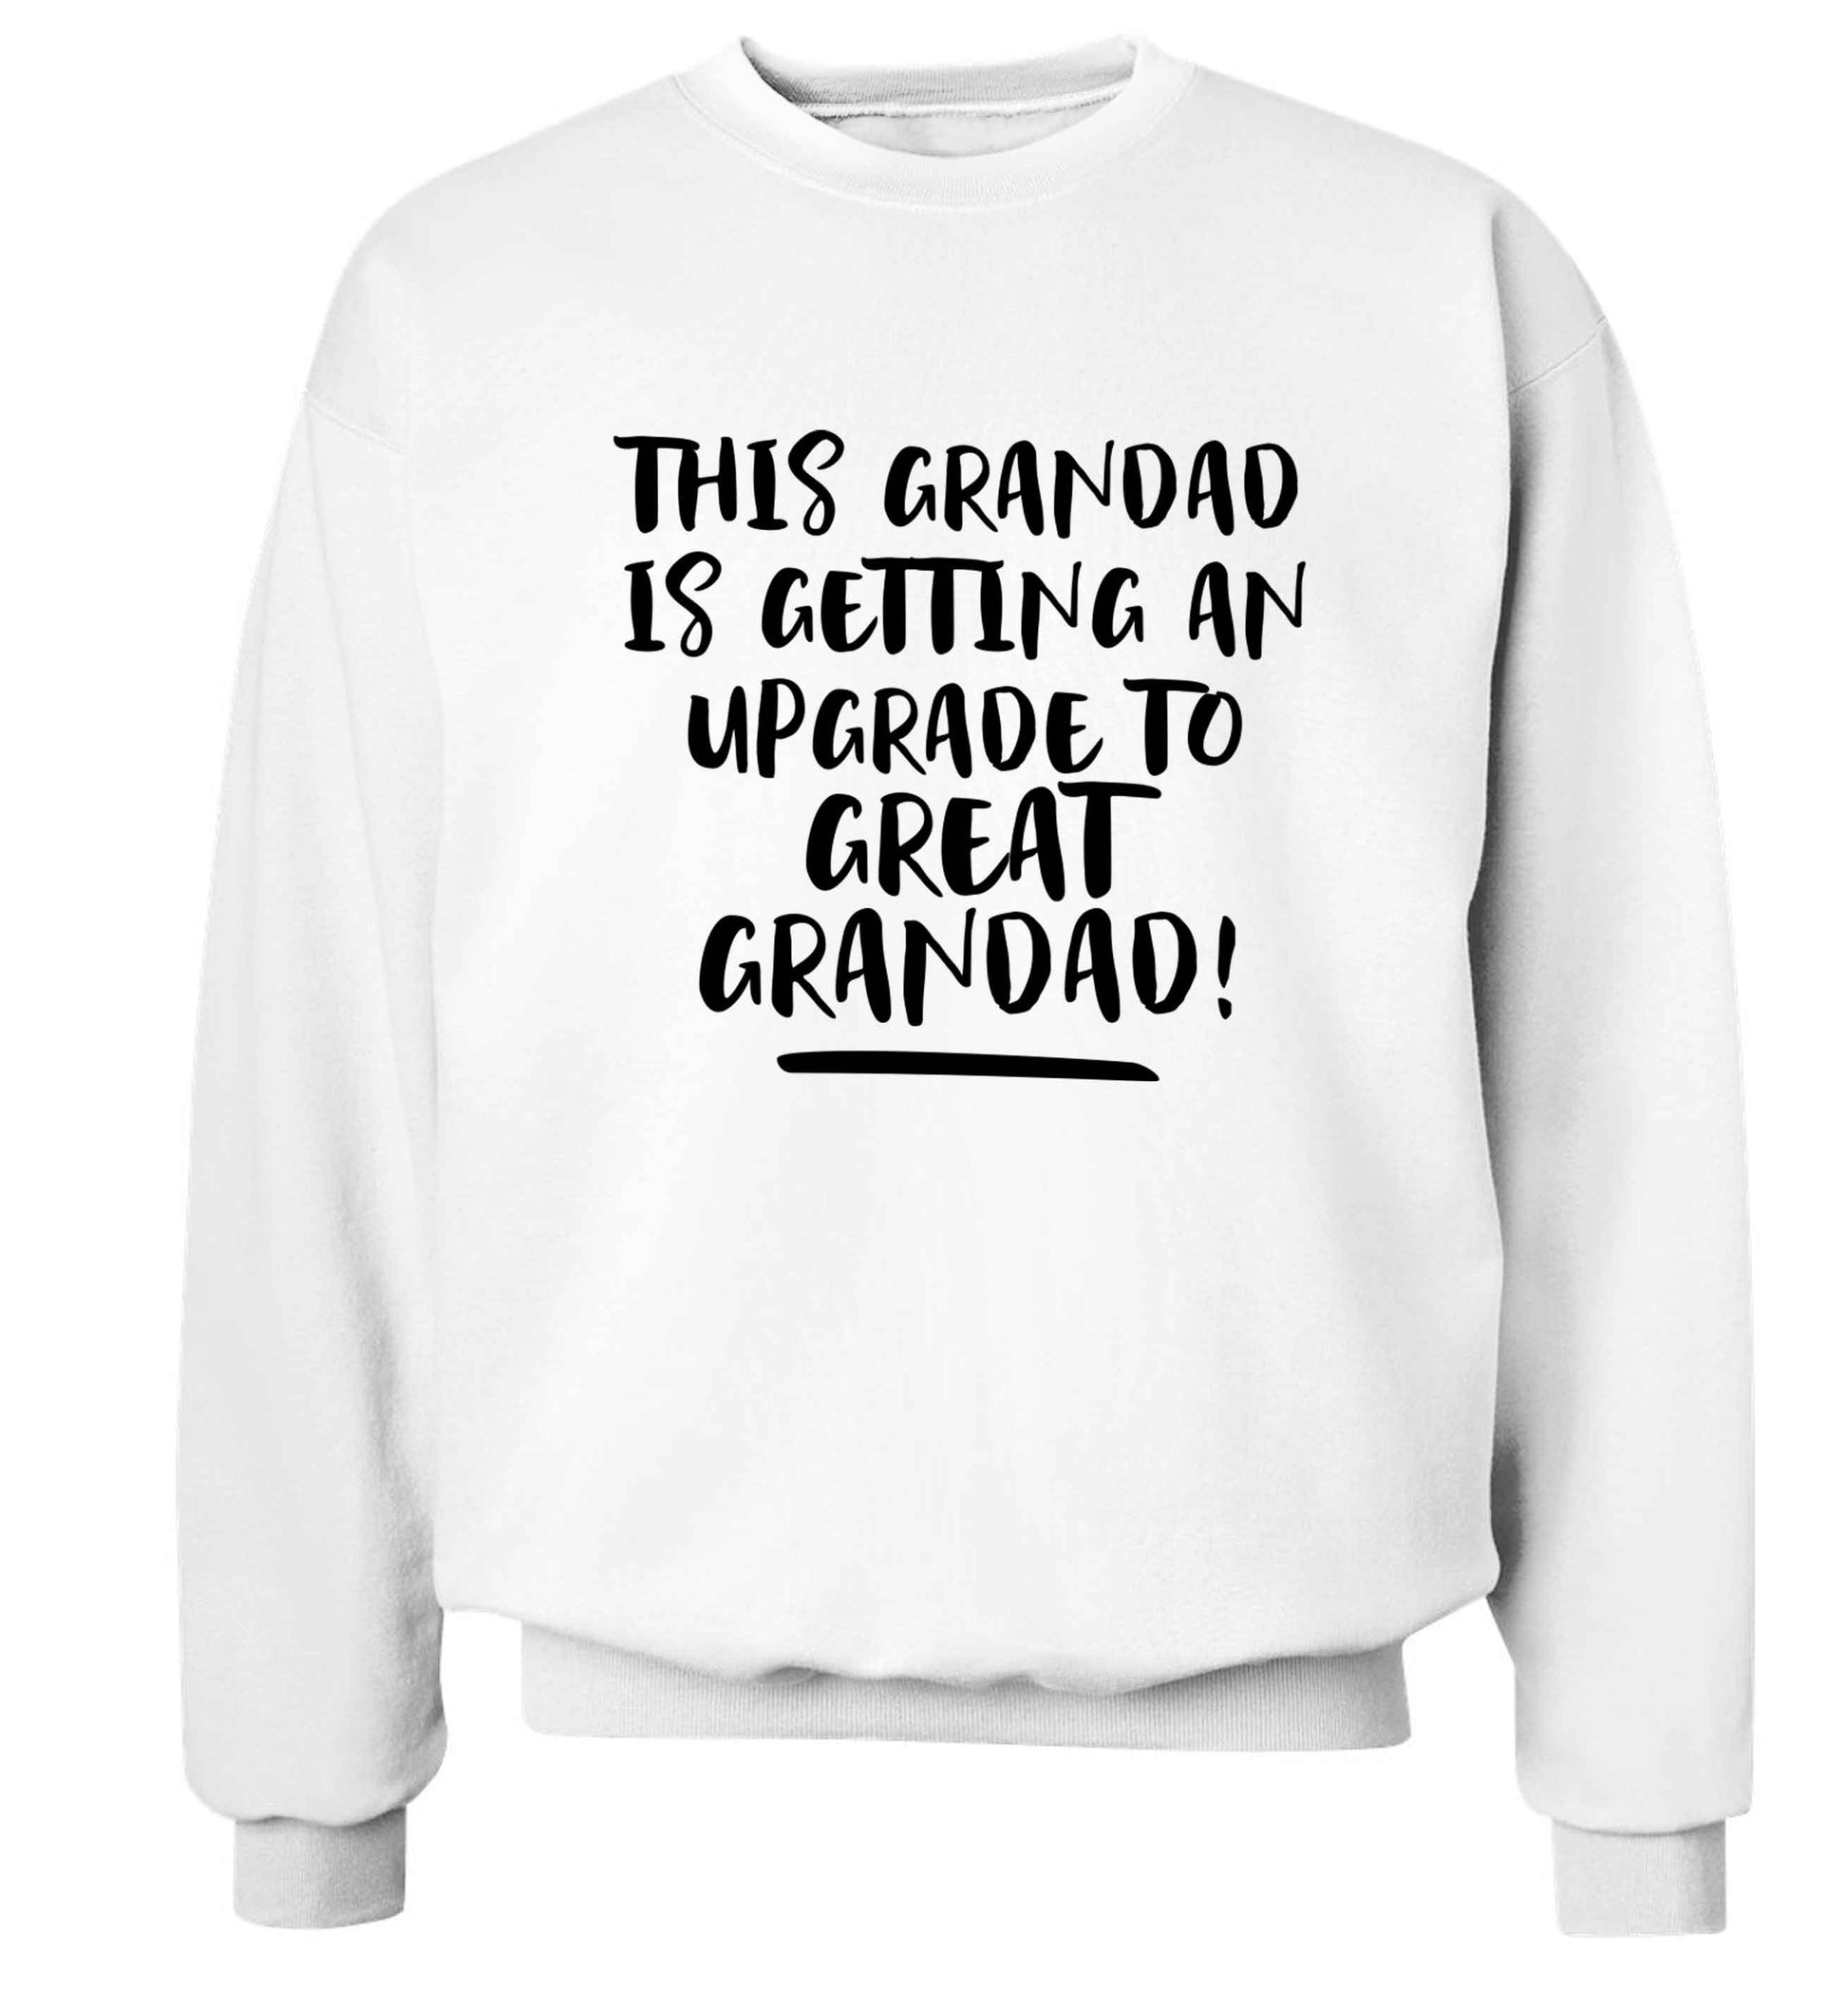 This grandad is getting an upgrade to great grandad! Adult's unisex white Sweater 2XL